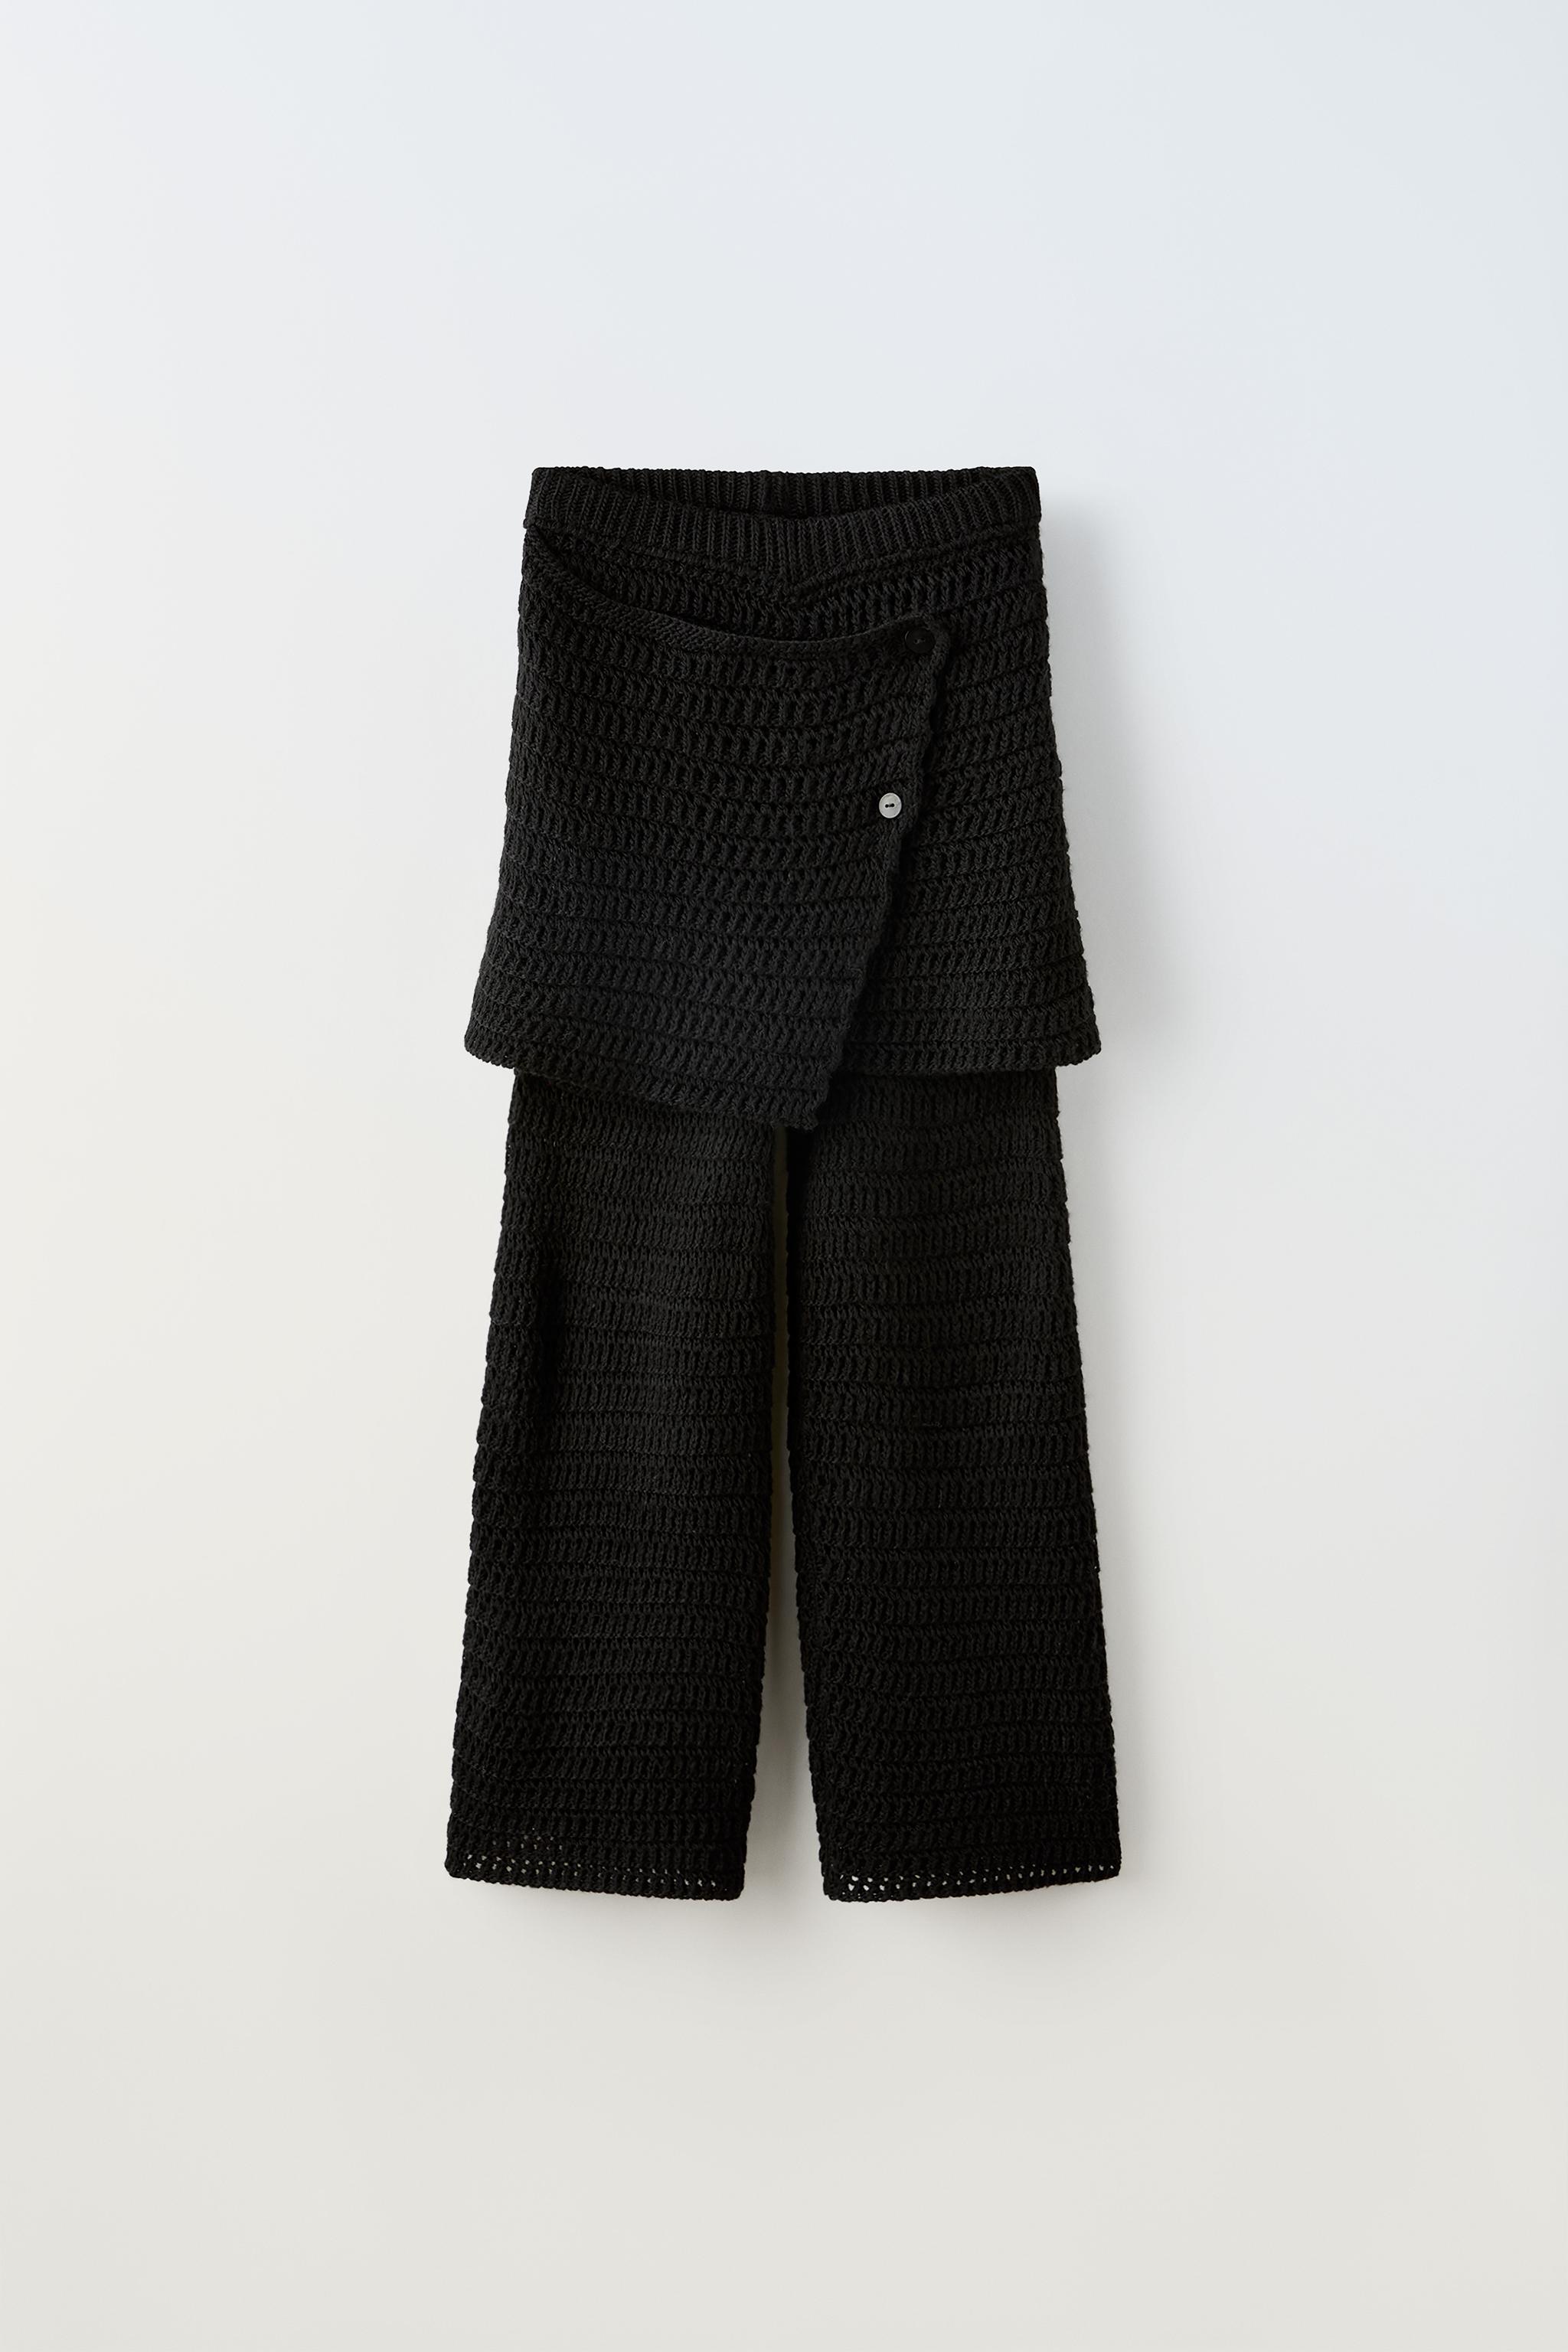 KNIT PANTS WITH SKIRT - Black